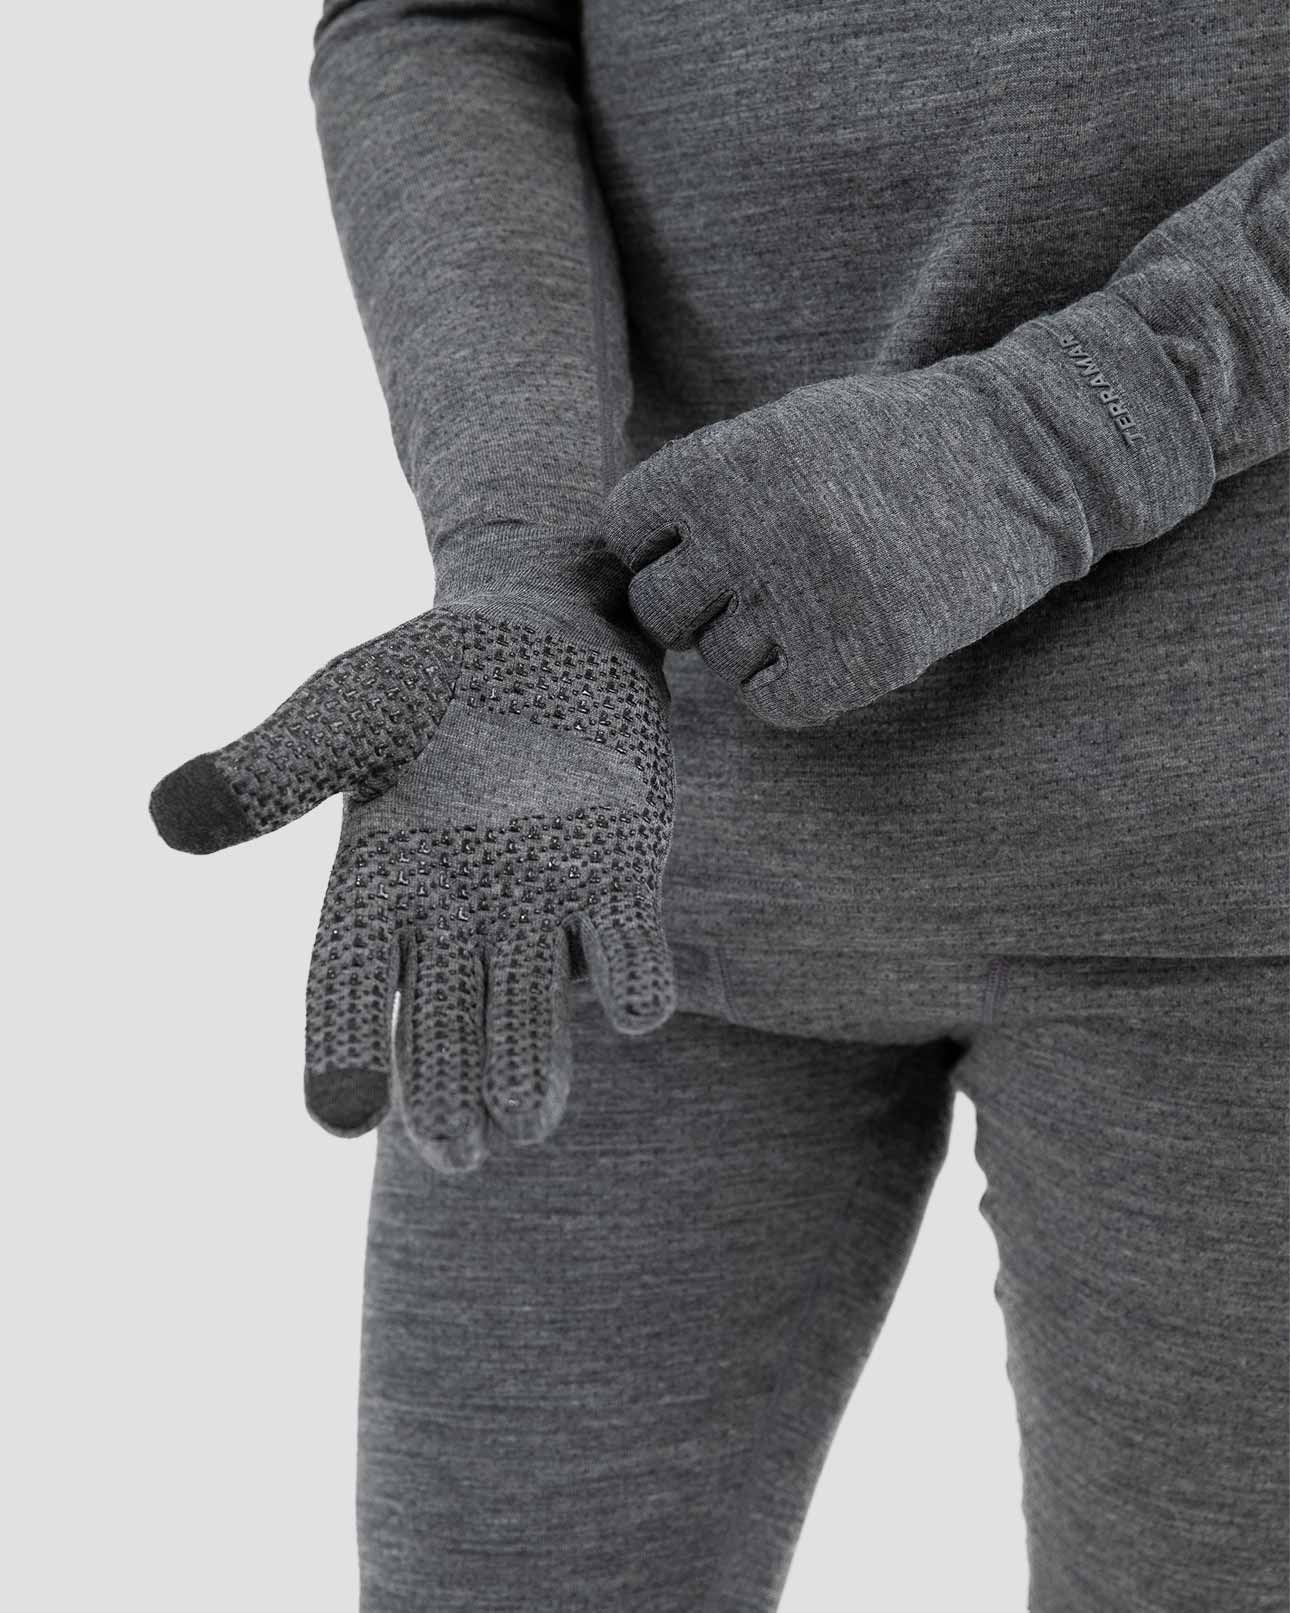  MERIWOOL Merino Wool Glove Liners - Touchscreen Compatible :  Sports & Outdoors